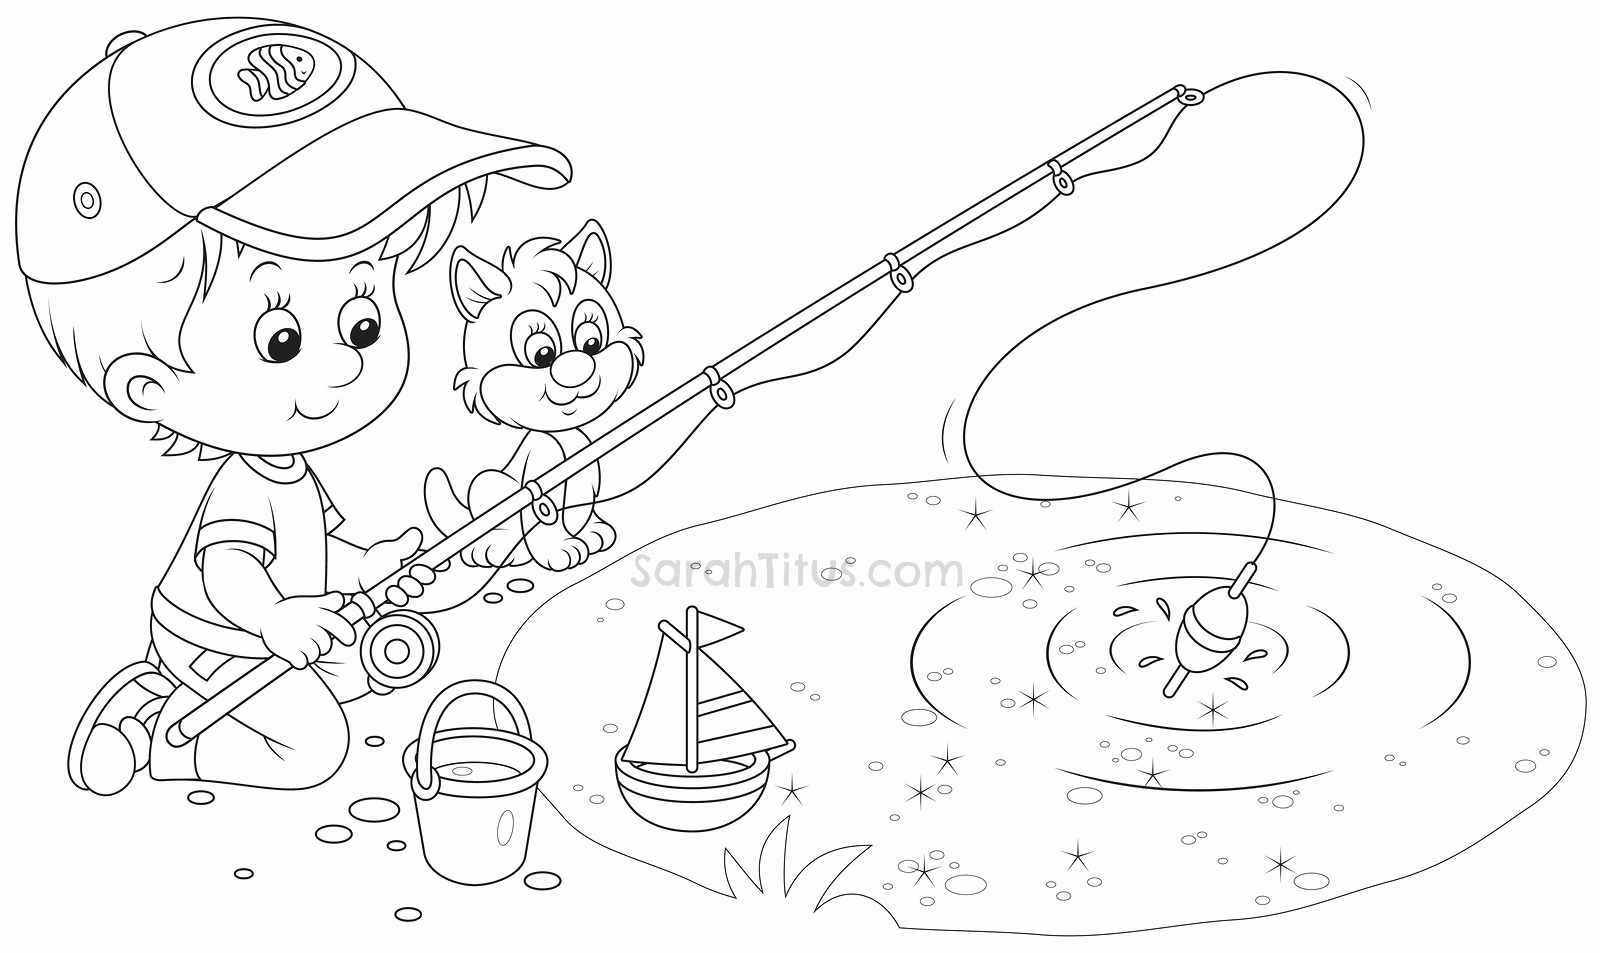 Pond Coloring Pages Free - High Quality Coloring Pages